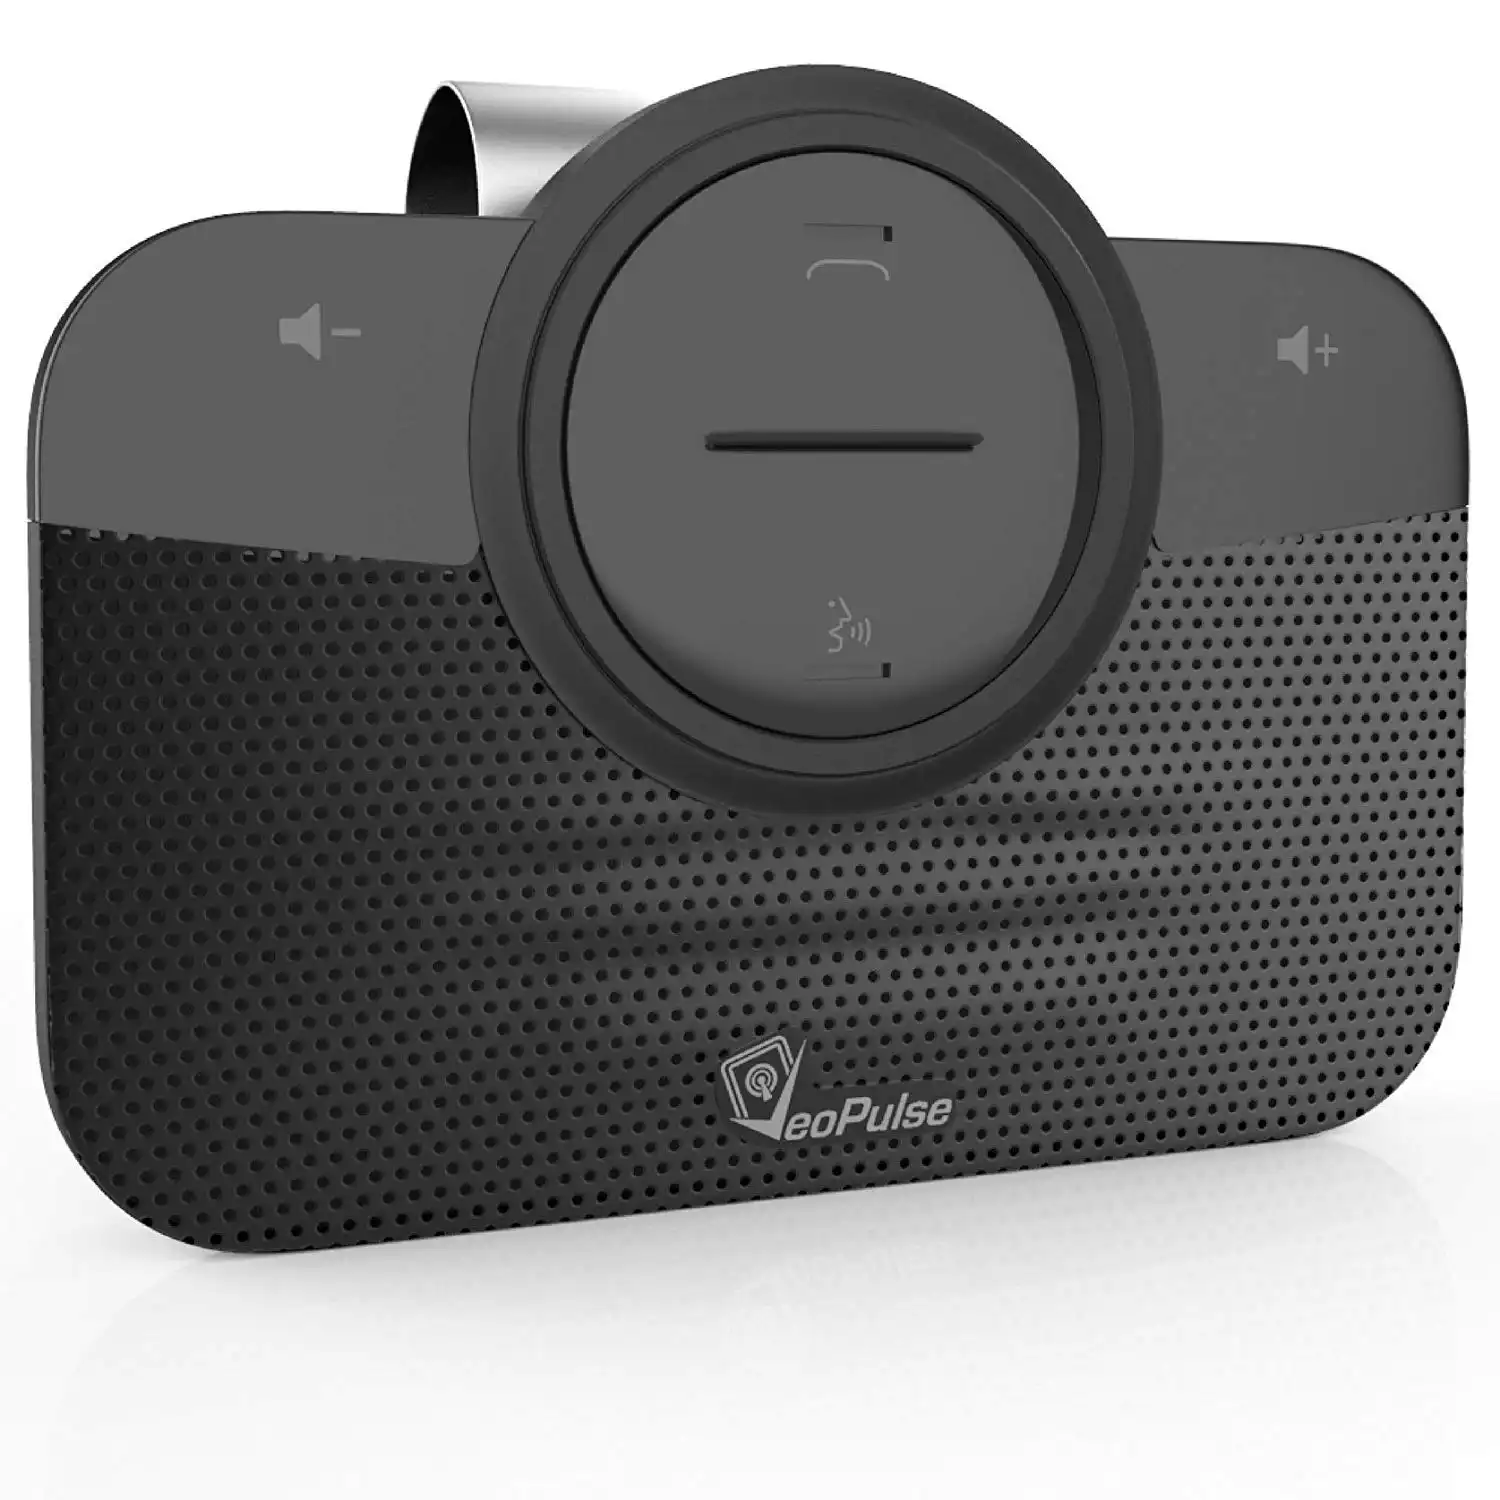 VeoPulse Car Speakerphone B-PRO 2 Hands Free with Bluetooth Automatic Mobile Phone Connection - Safe Hands-free kit Talking and Driving Wireless Techn